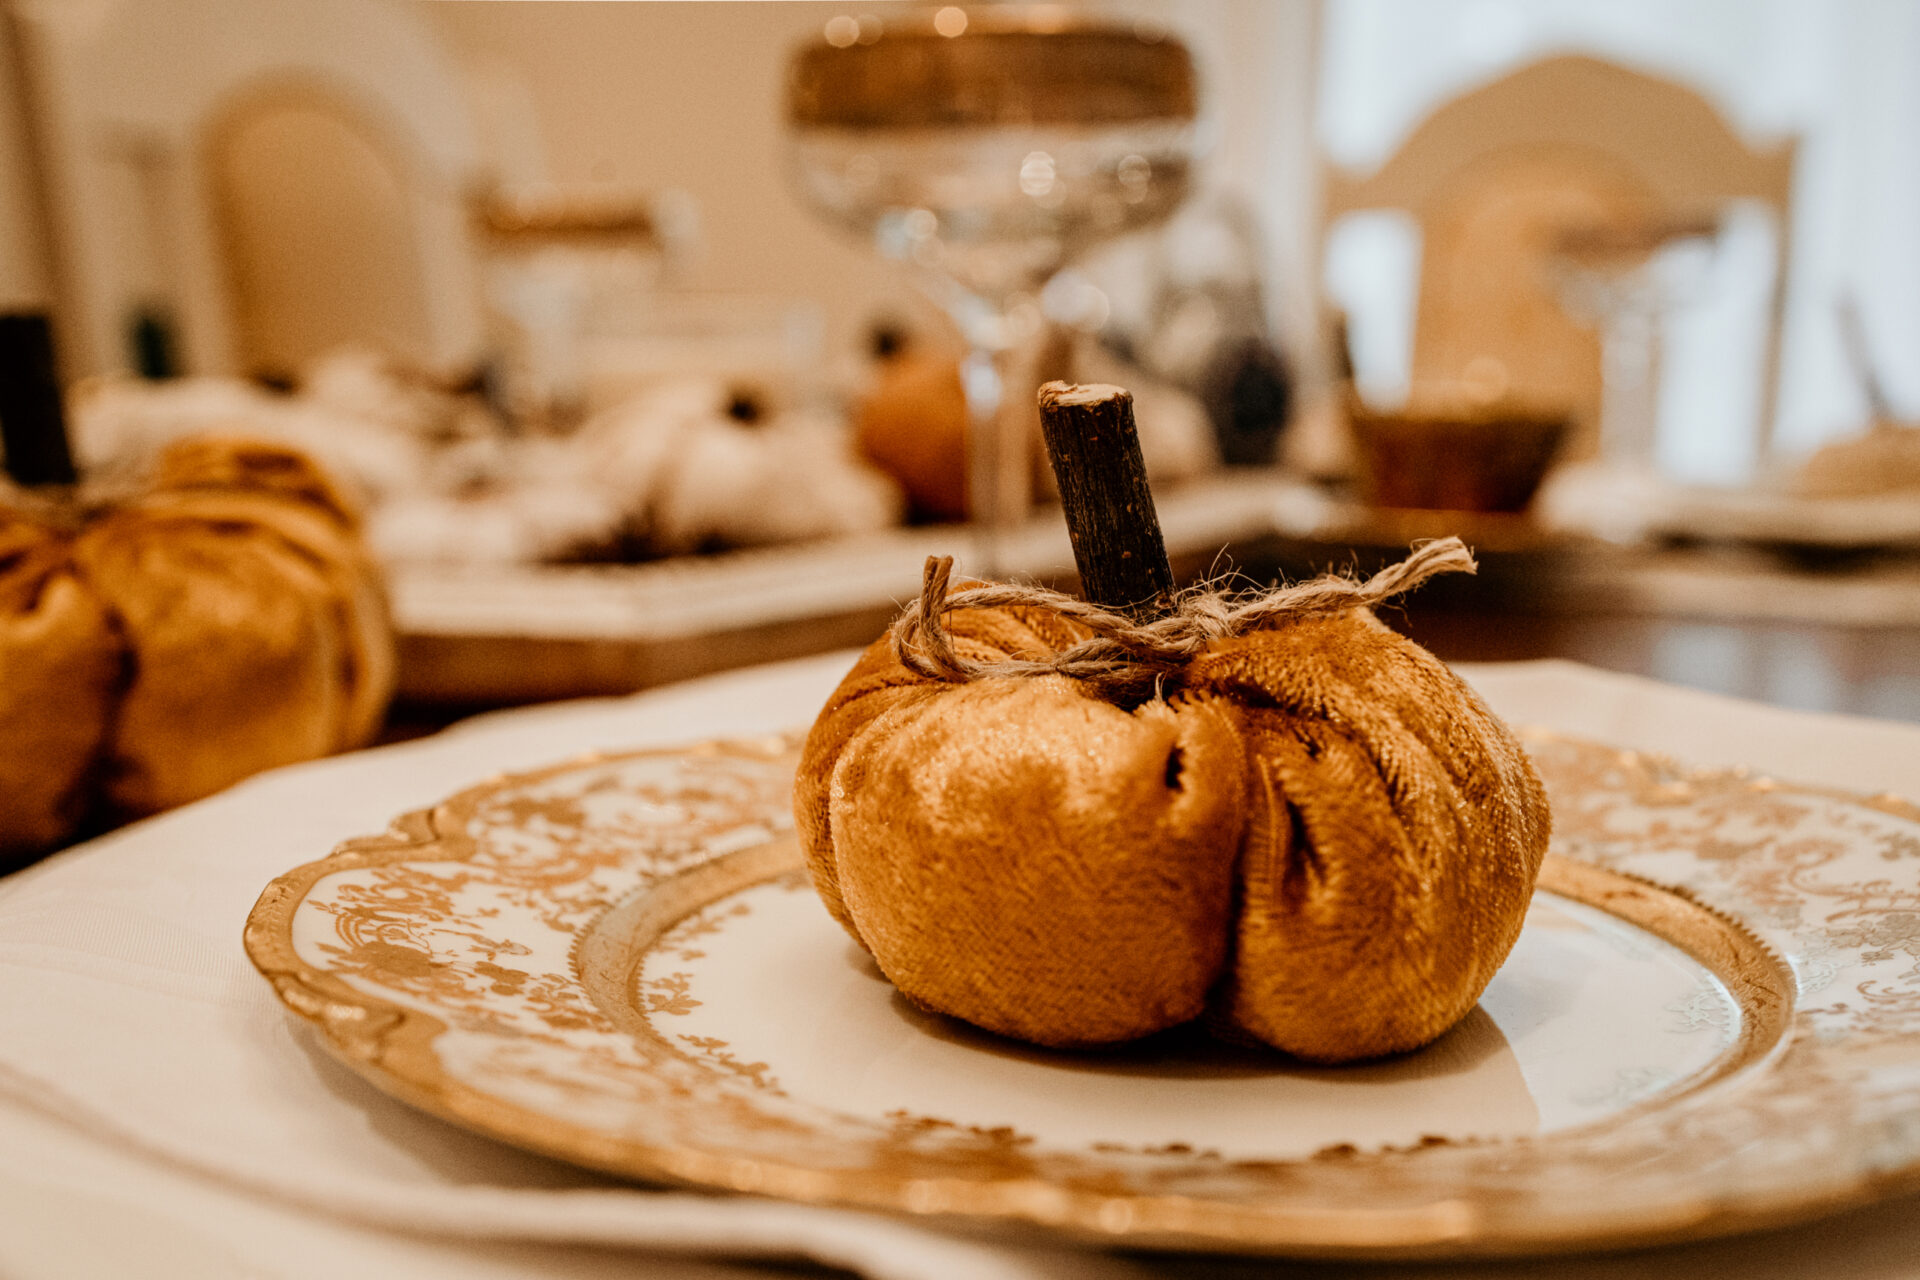 An orange velvet pumpkin with a wooden stick as its stem is placed on a gold rimmed plate that is part of an elegant table setting.